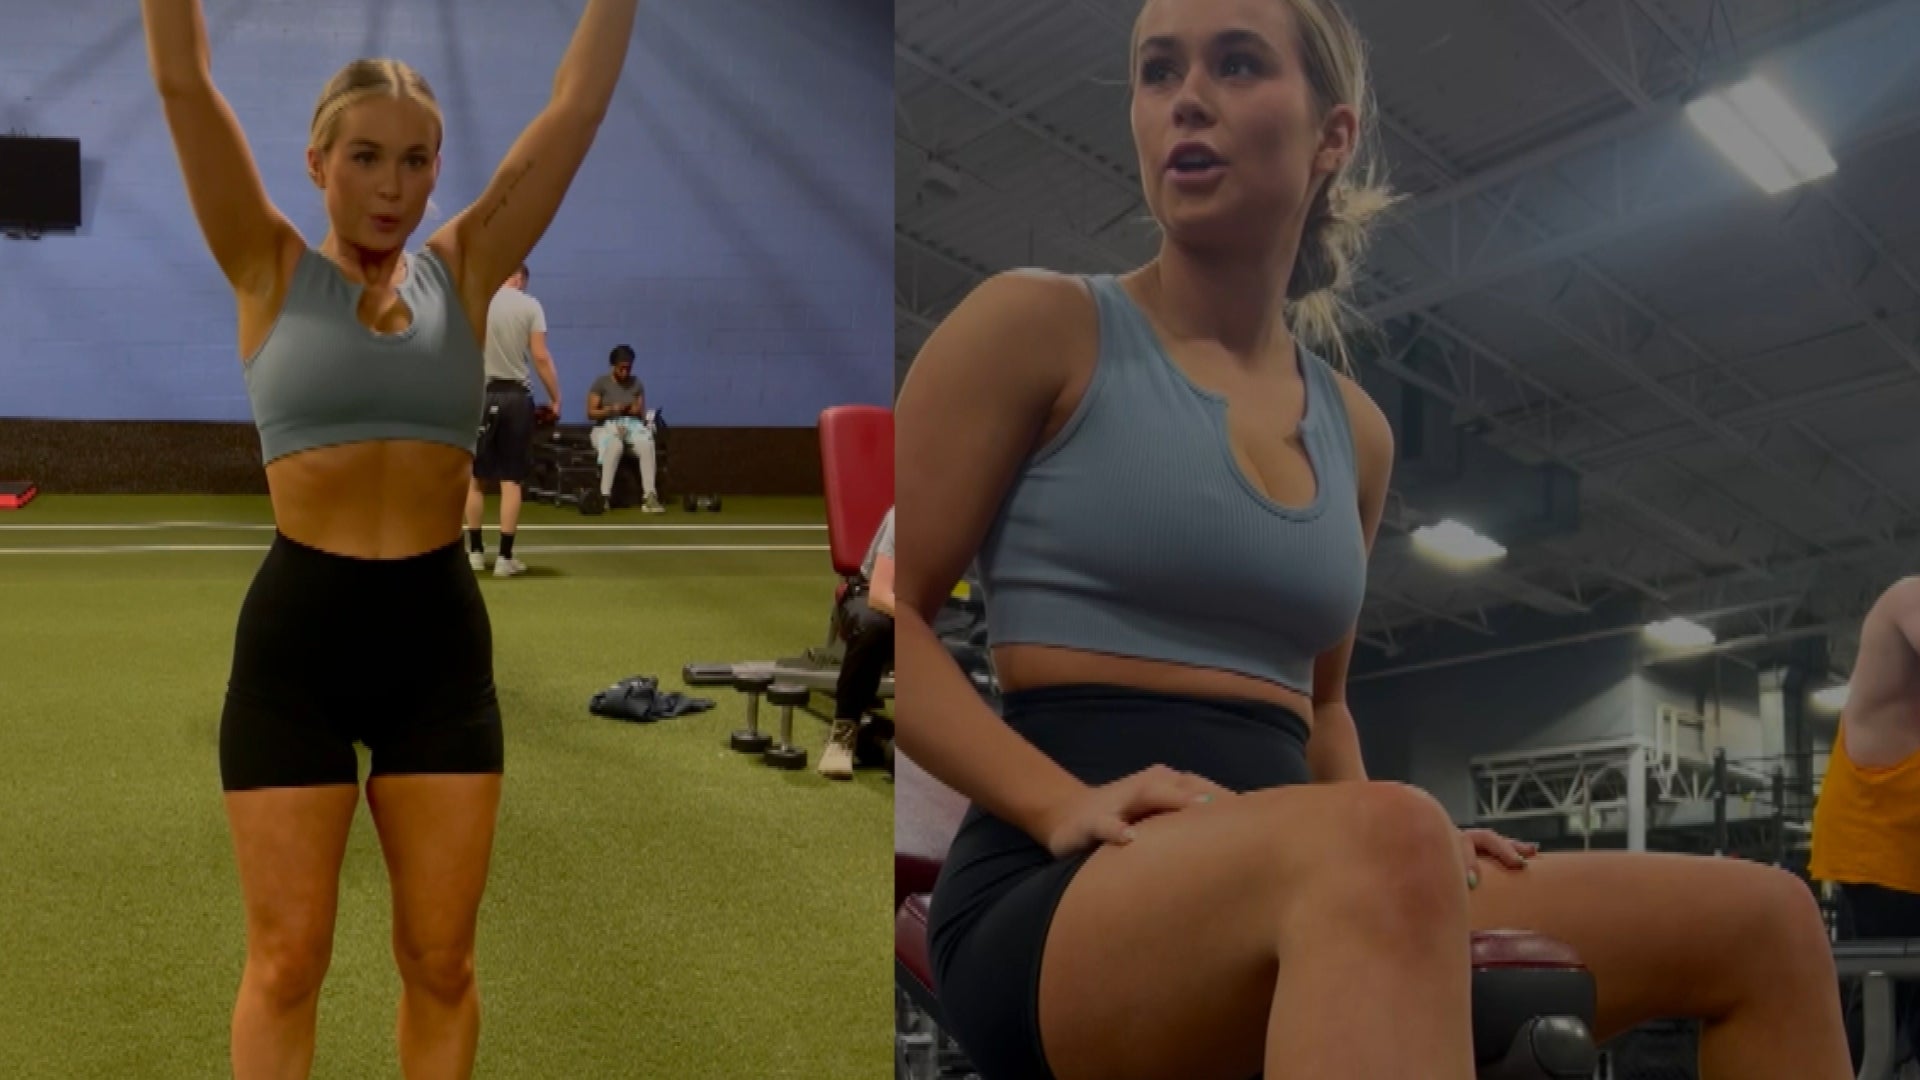 Woman's gym outfit goes viral and unleashes huge debate